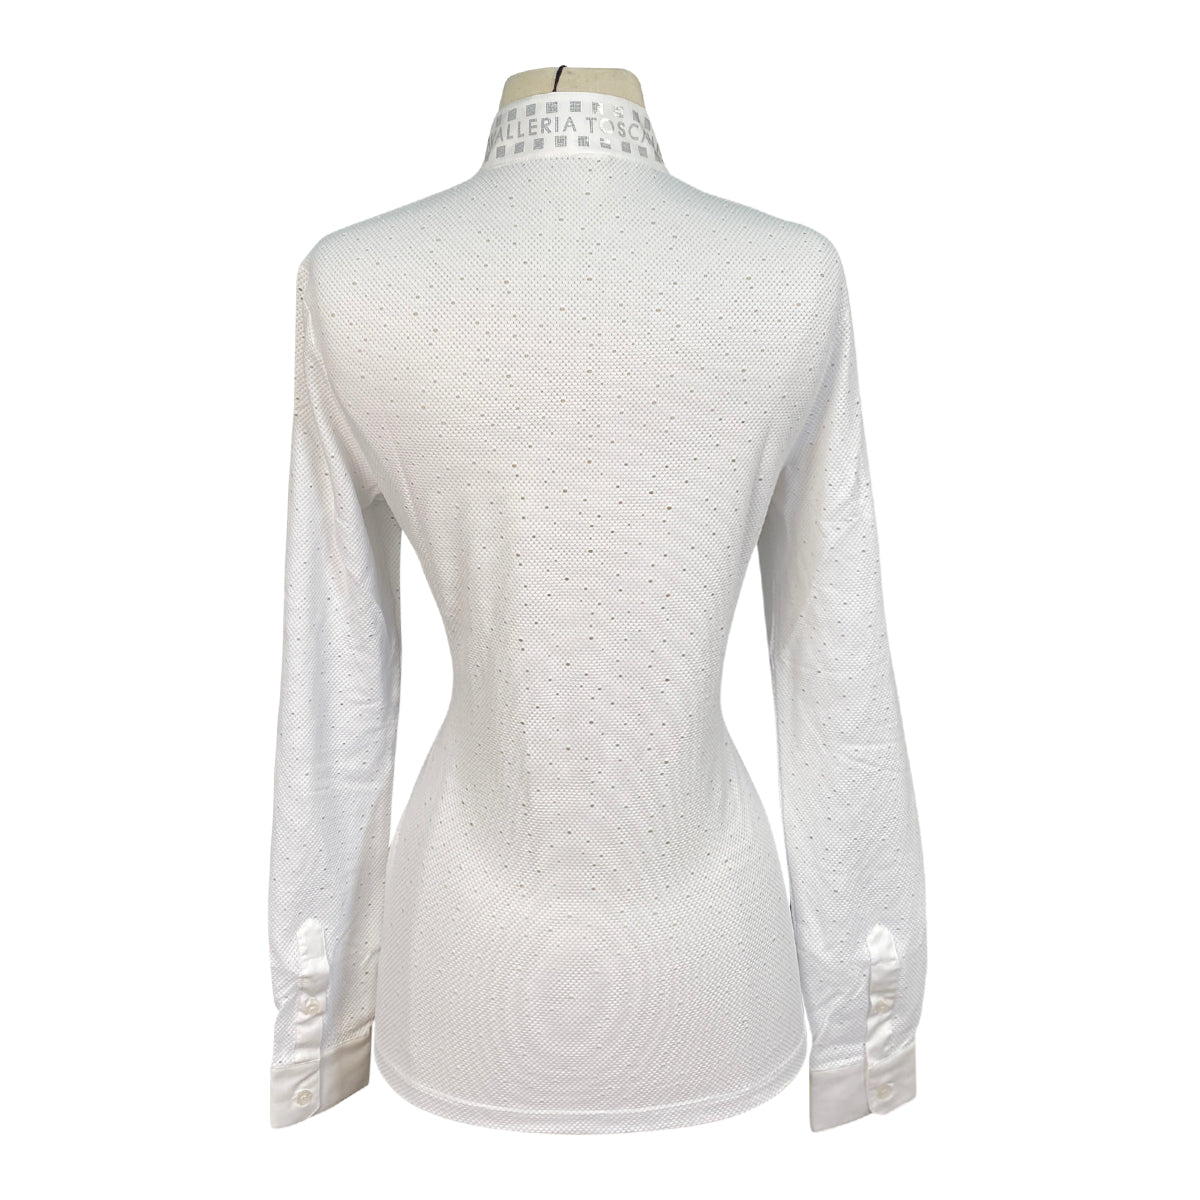 Cavalleria Toscana L/S Perforated Show Shirt w/Sequins in White